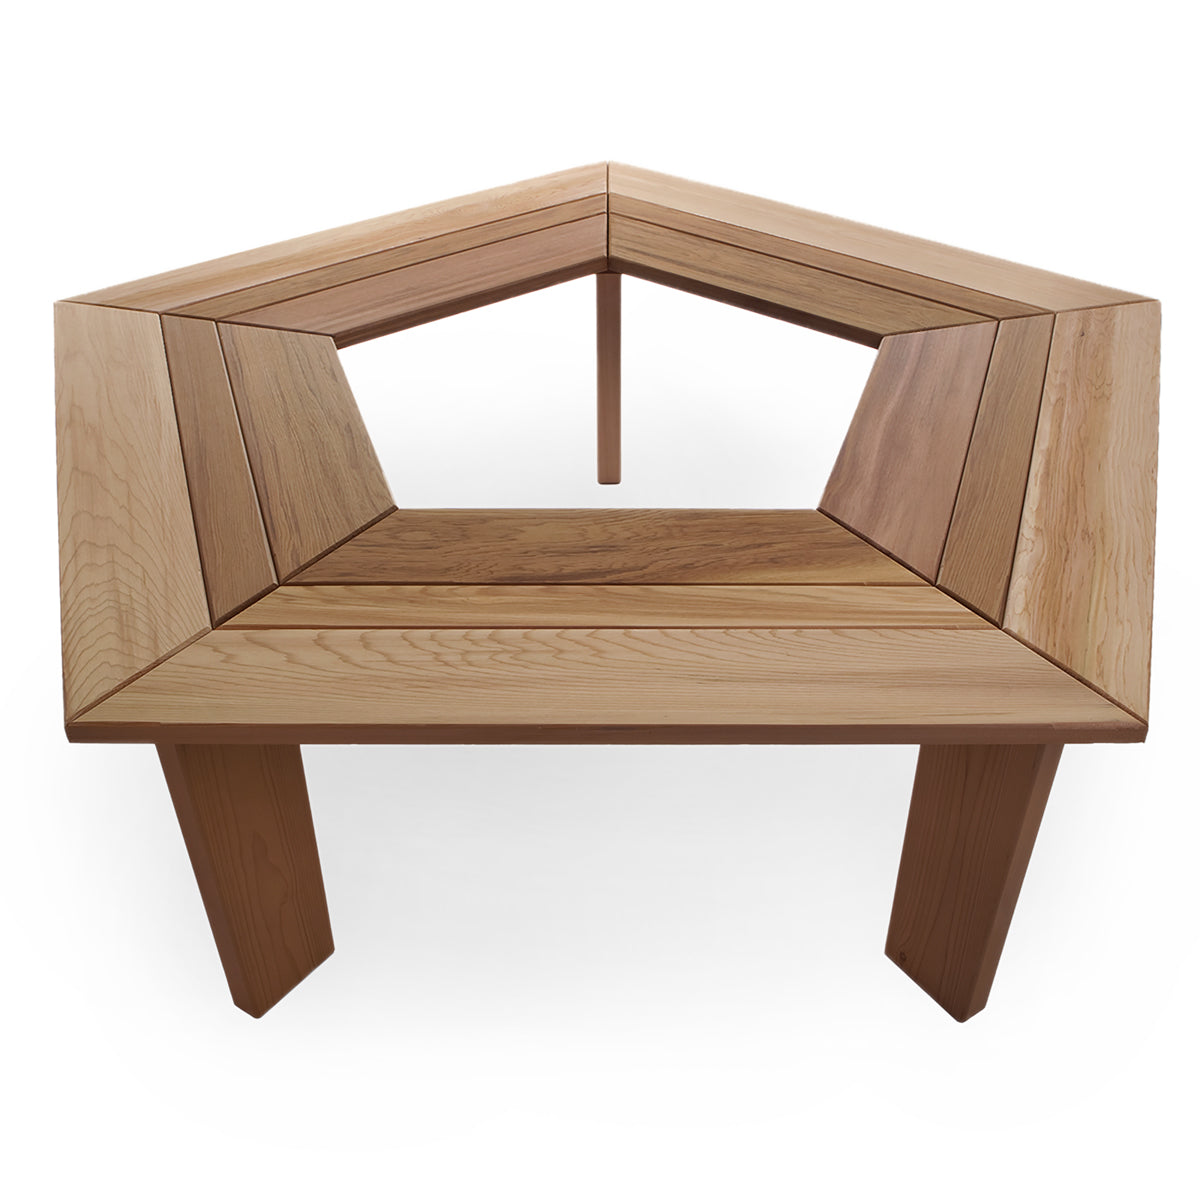 5 Sided Tree Bench